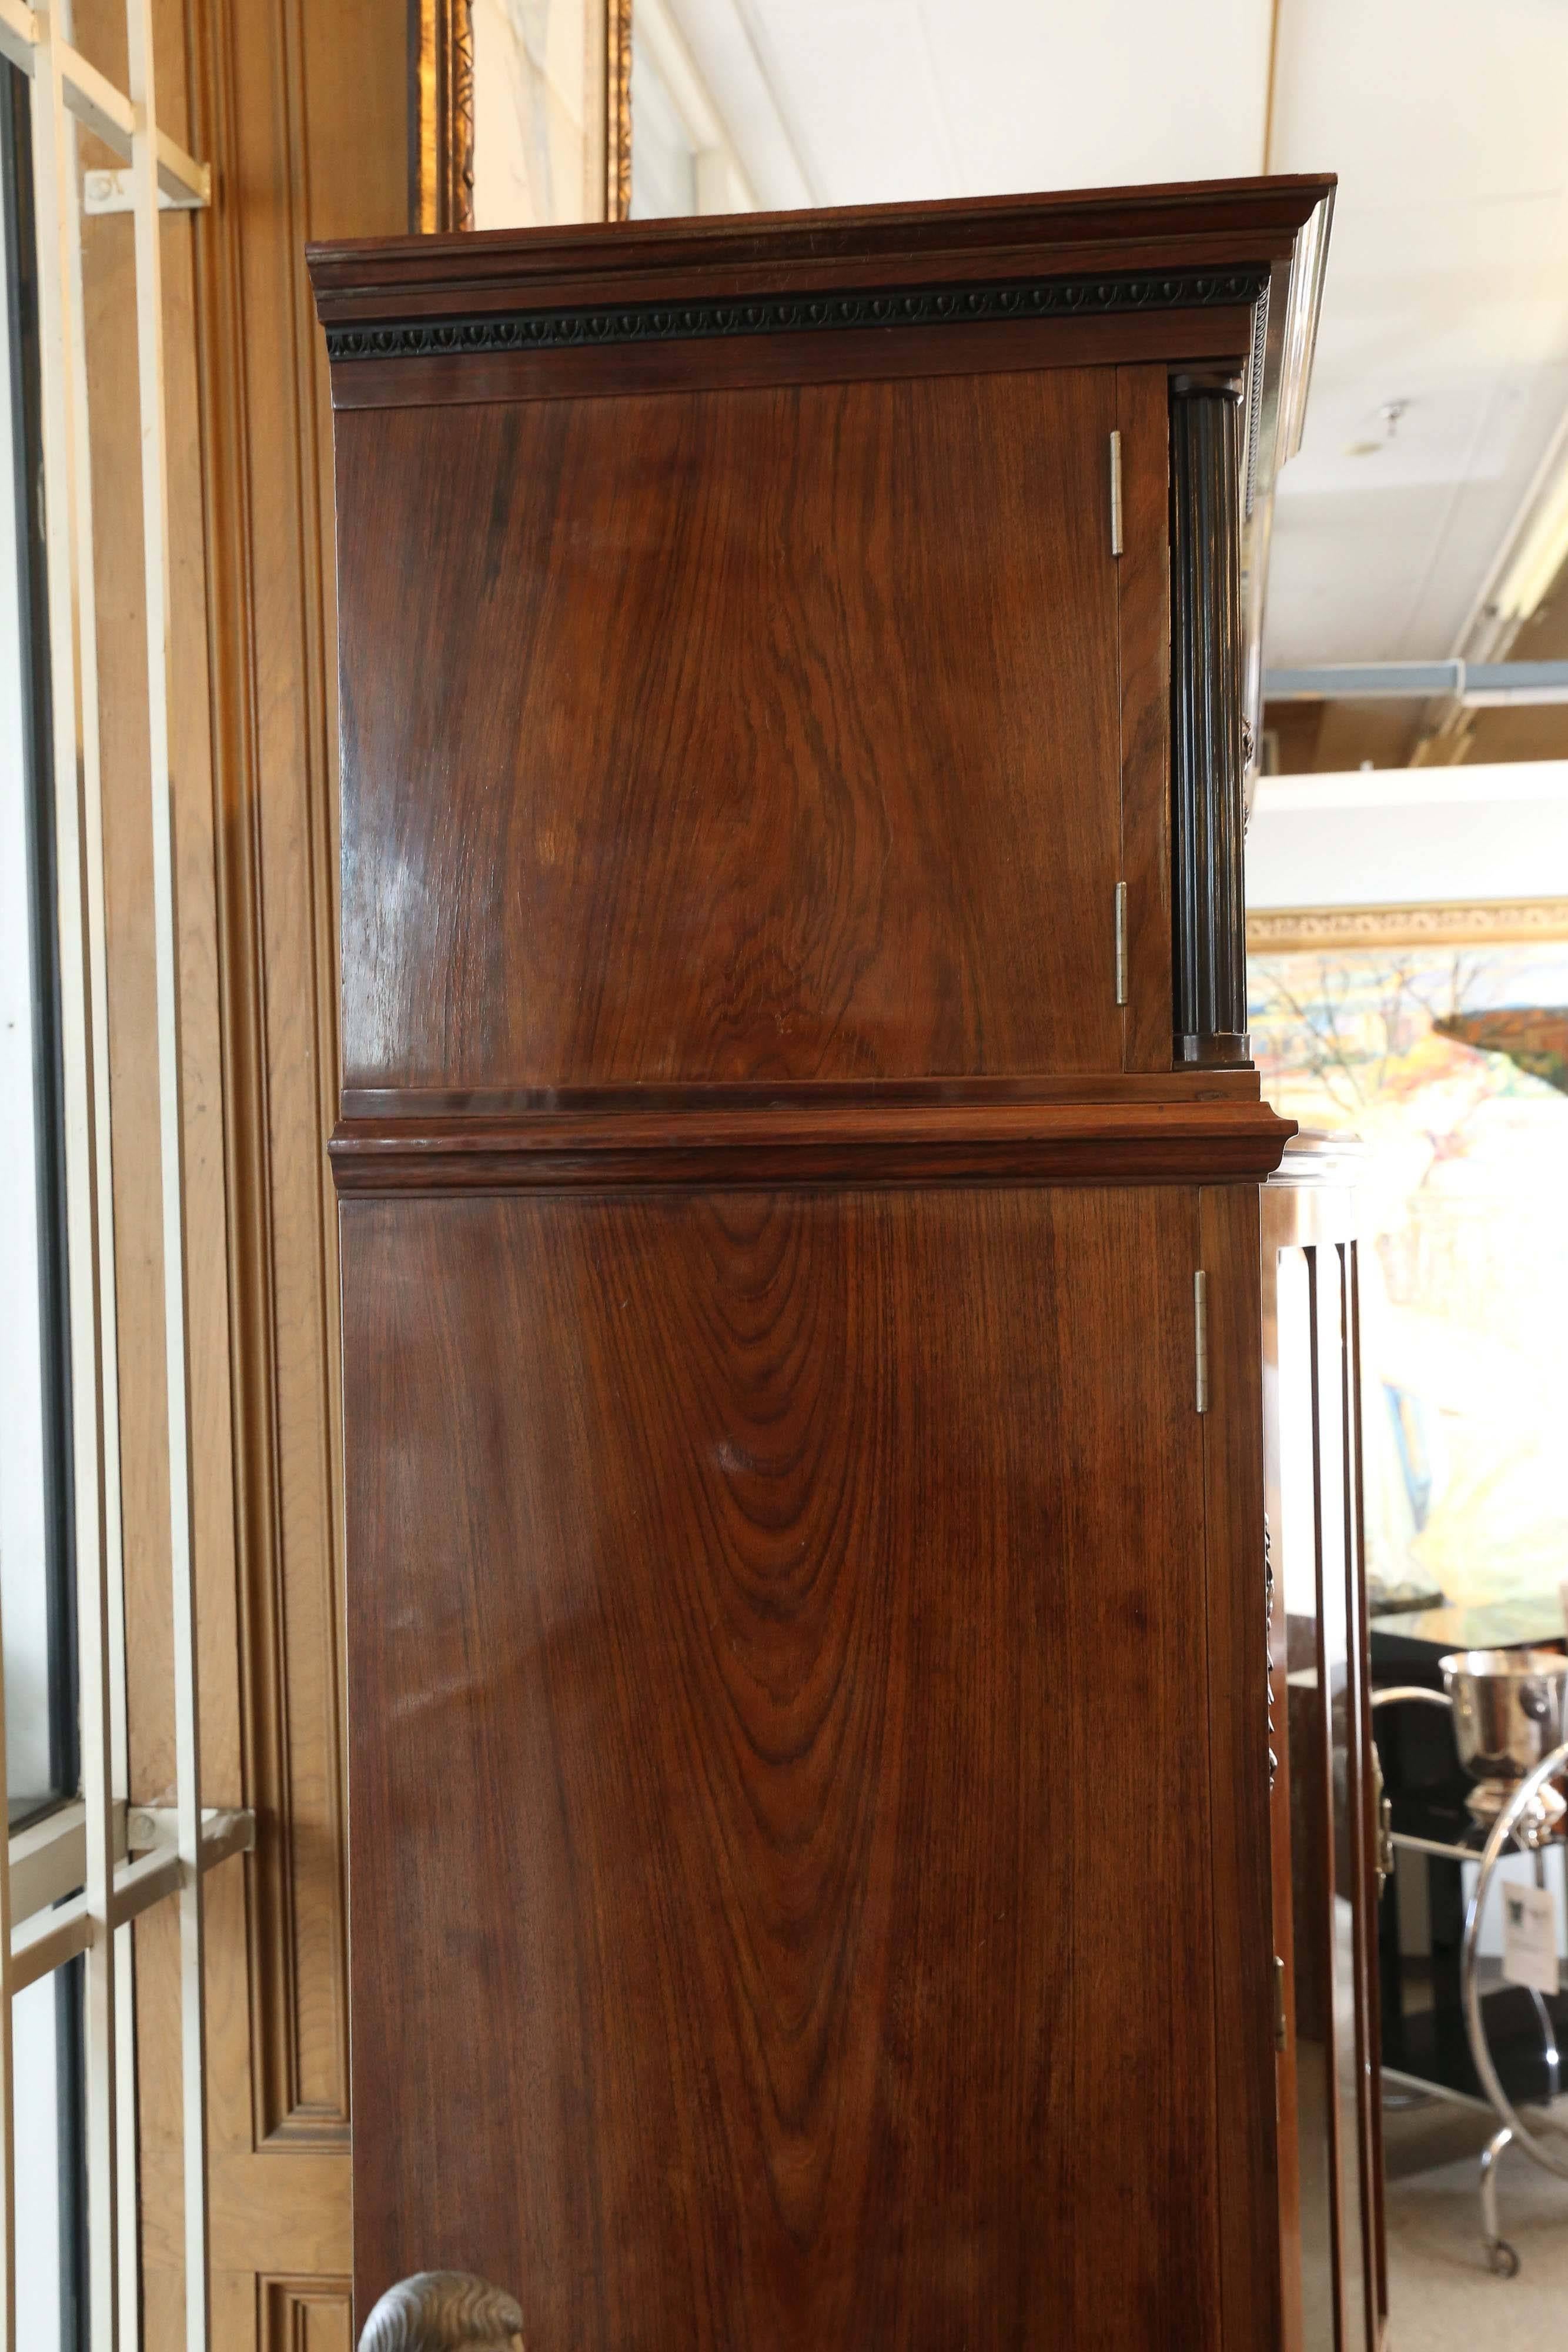 Hungarian Credenza or Bookcase in Palisander Wood from Art Deco period For Sale 5